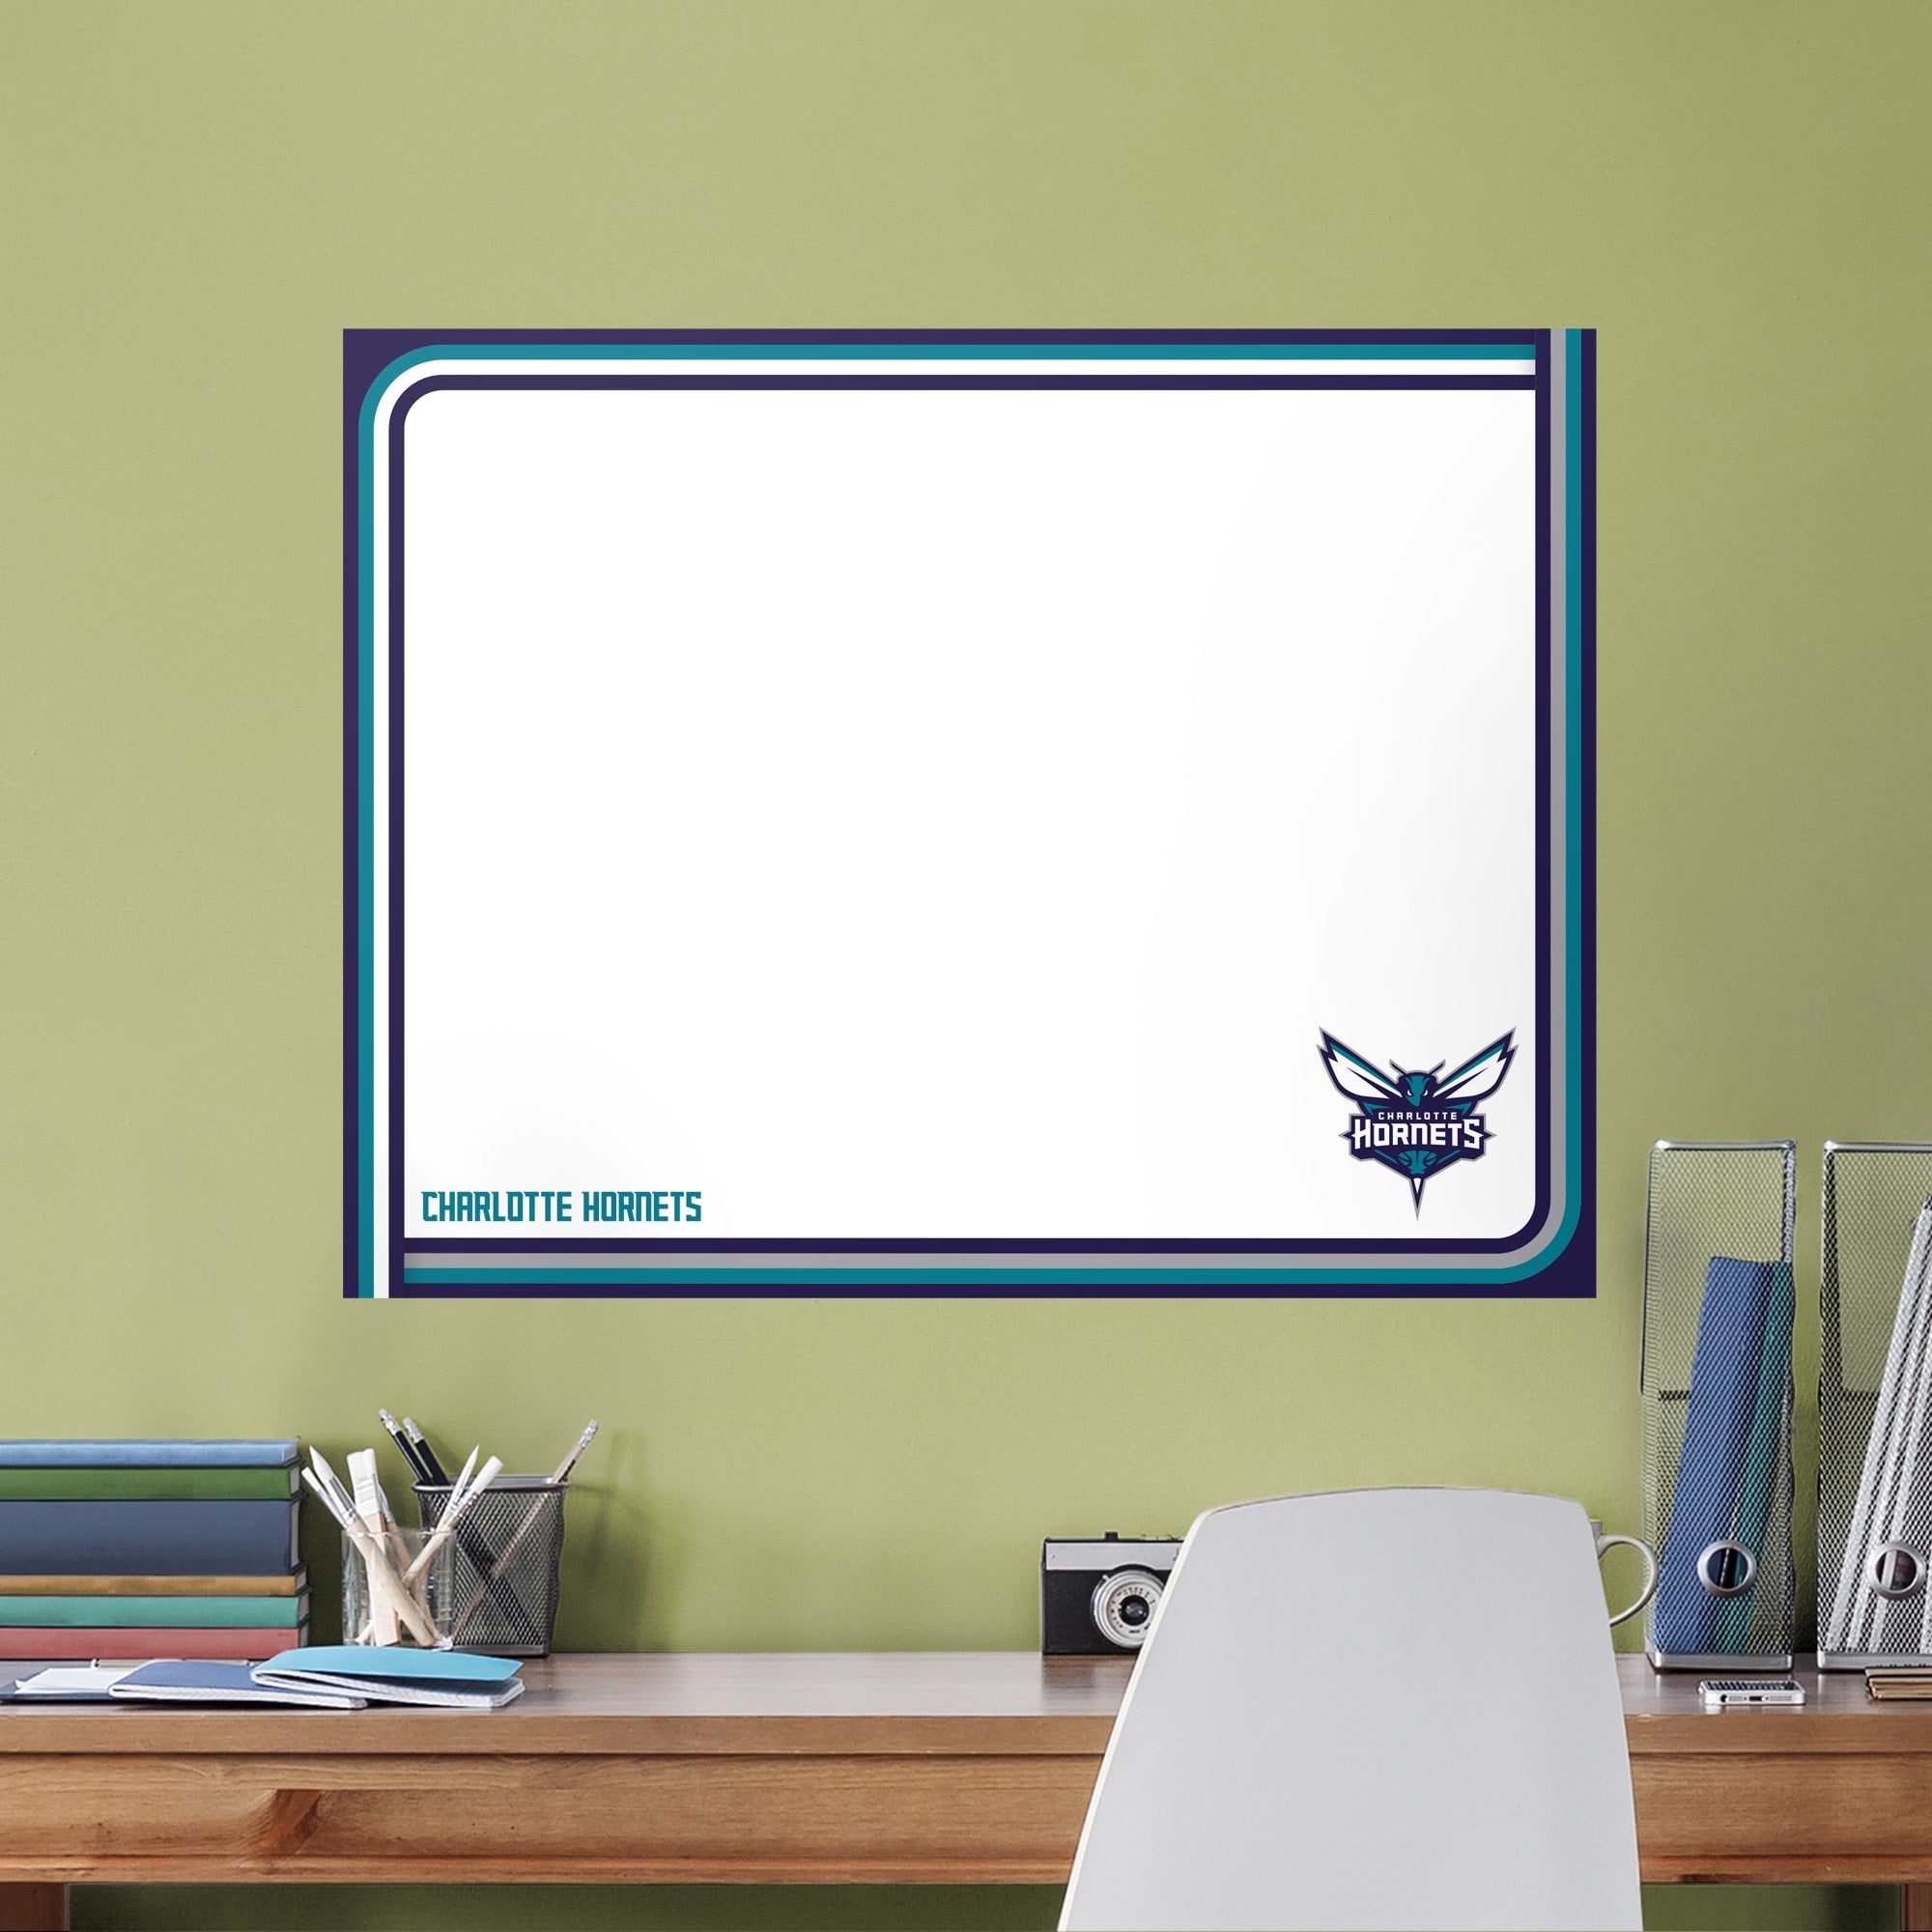 Charlotte Hornets for Charlotte Hornets: Dry Erase Whiteboard - Officially Licensed NBA Removable Wall Decal XL by Fathead | Vin